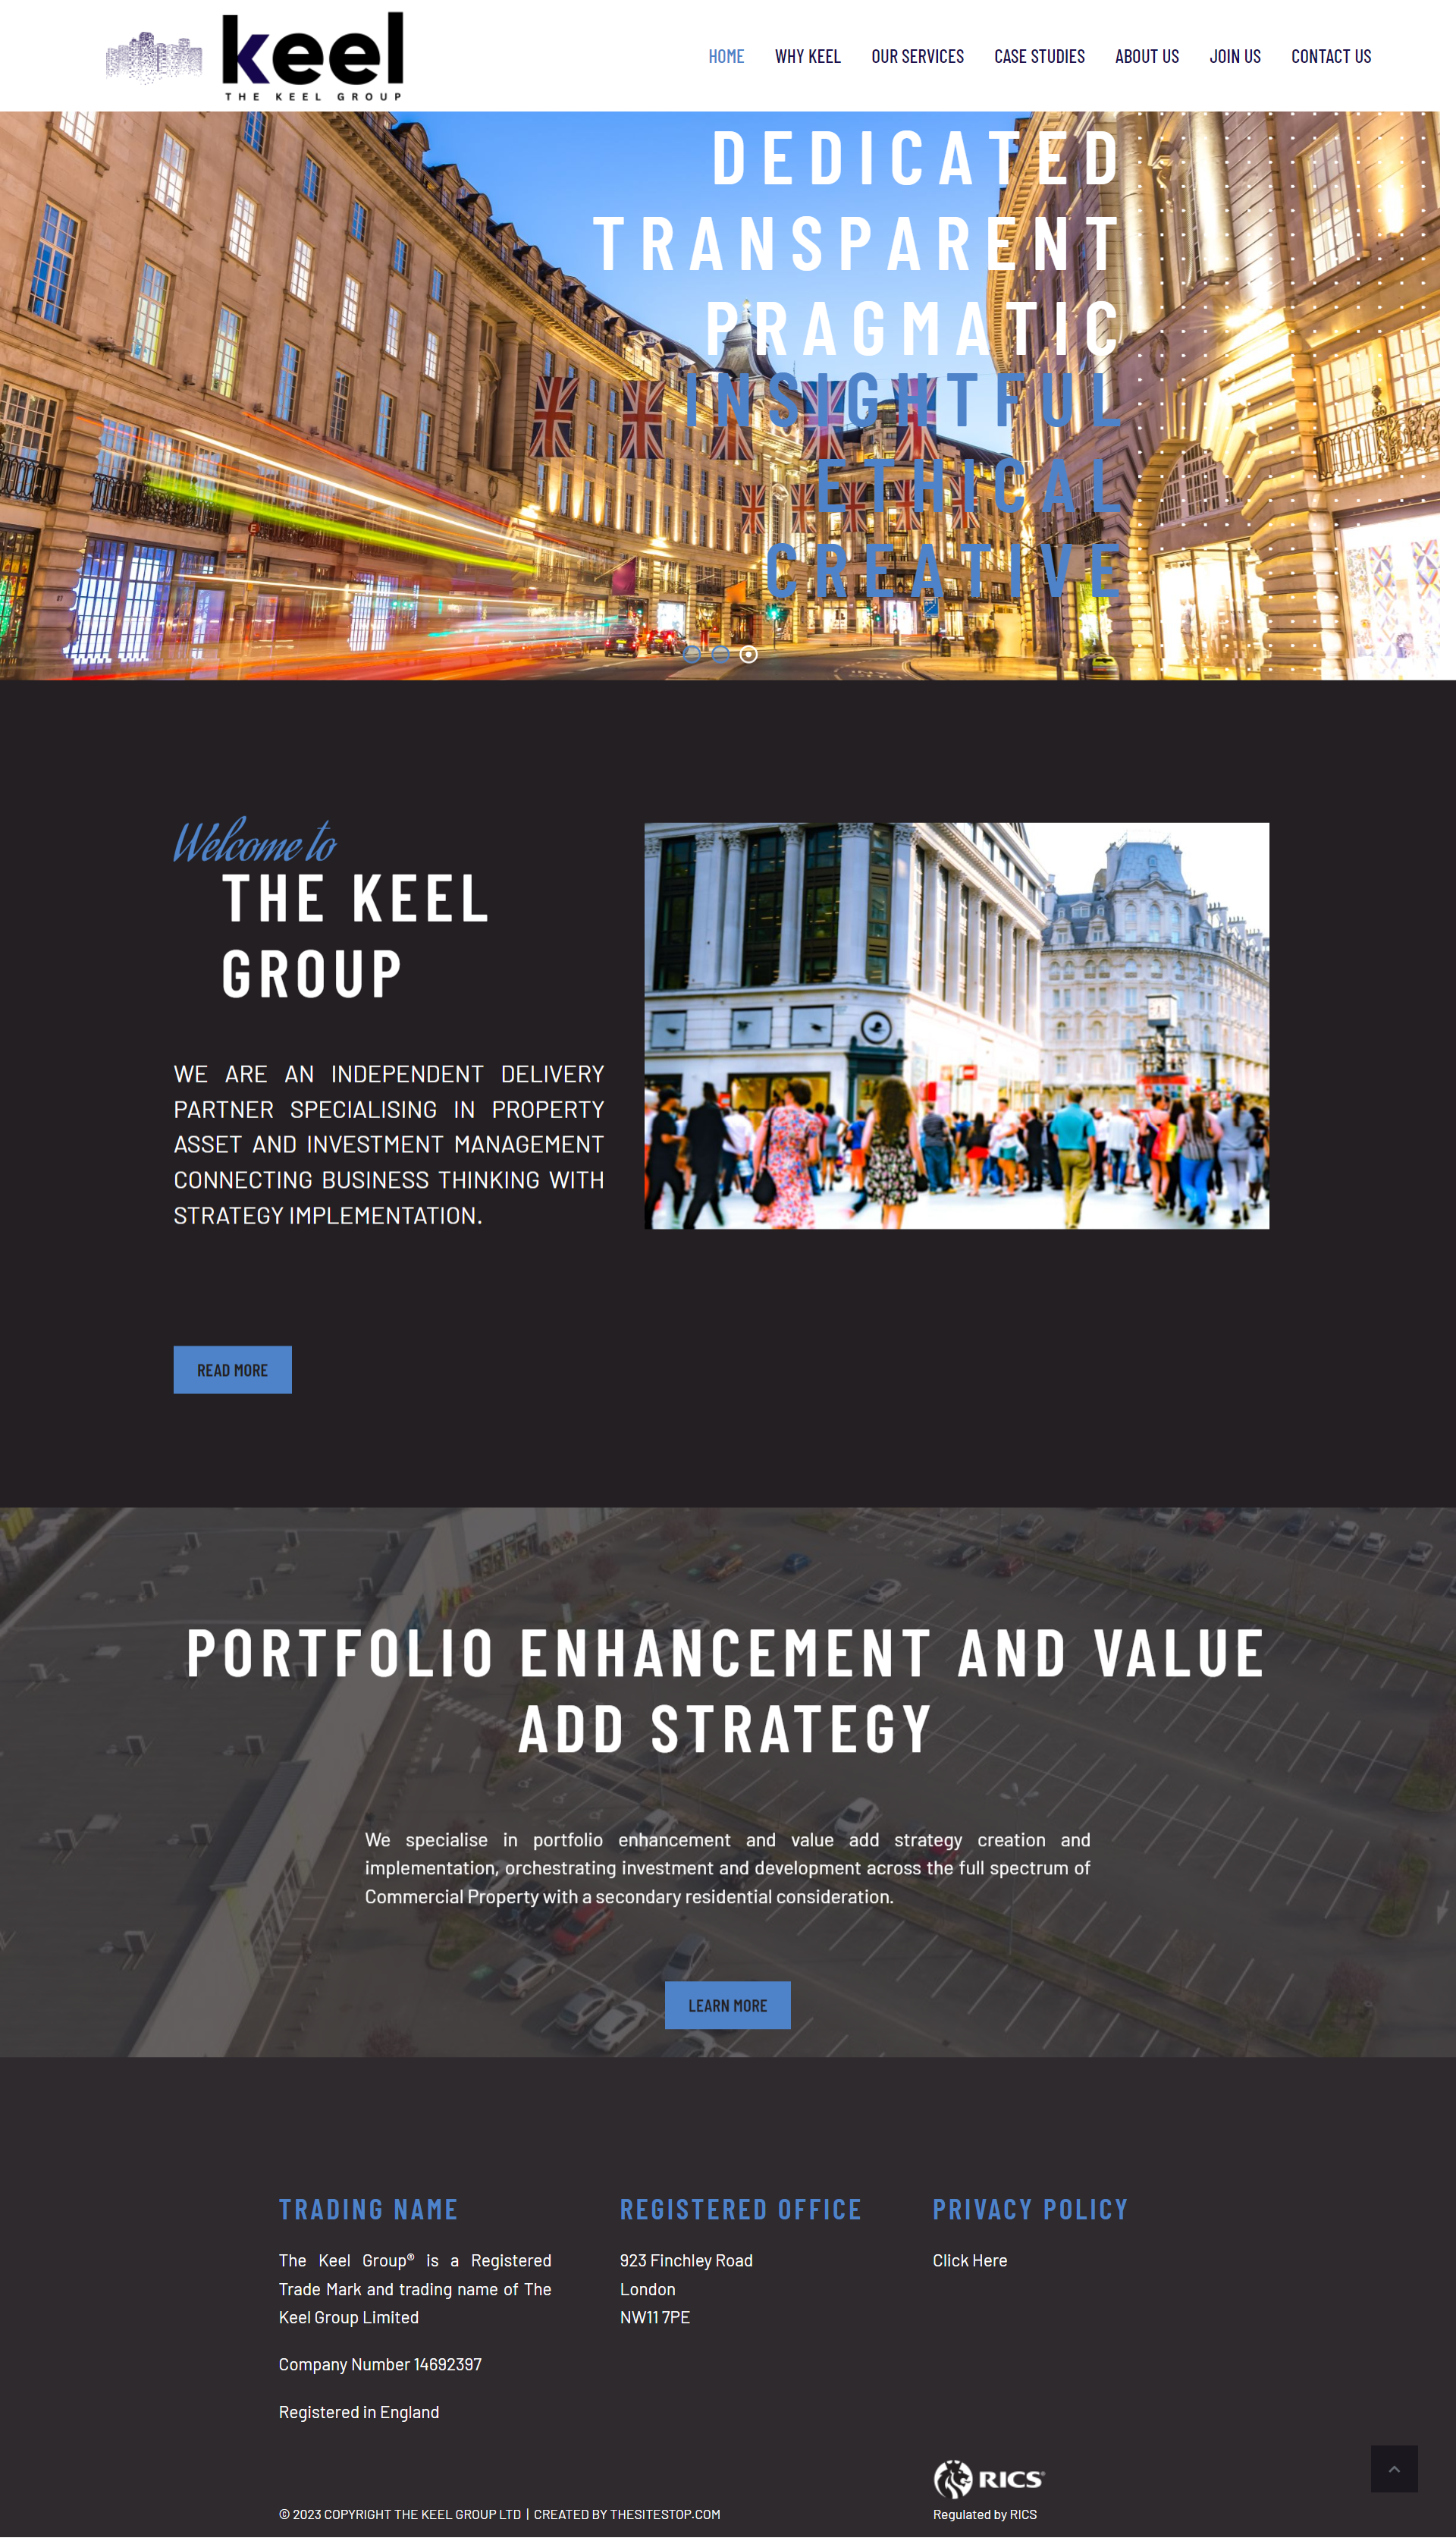 The-Keel-Group-Commercial-Property-Experts (3)